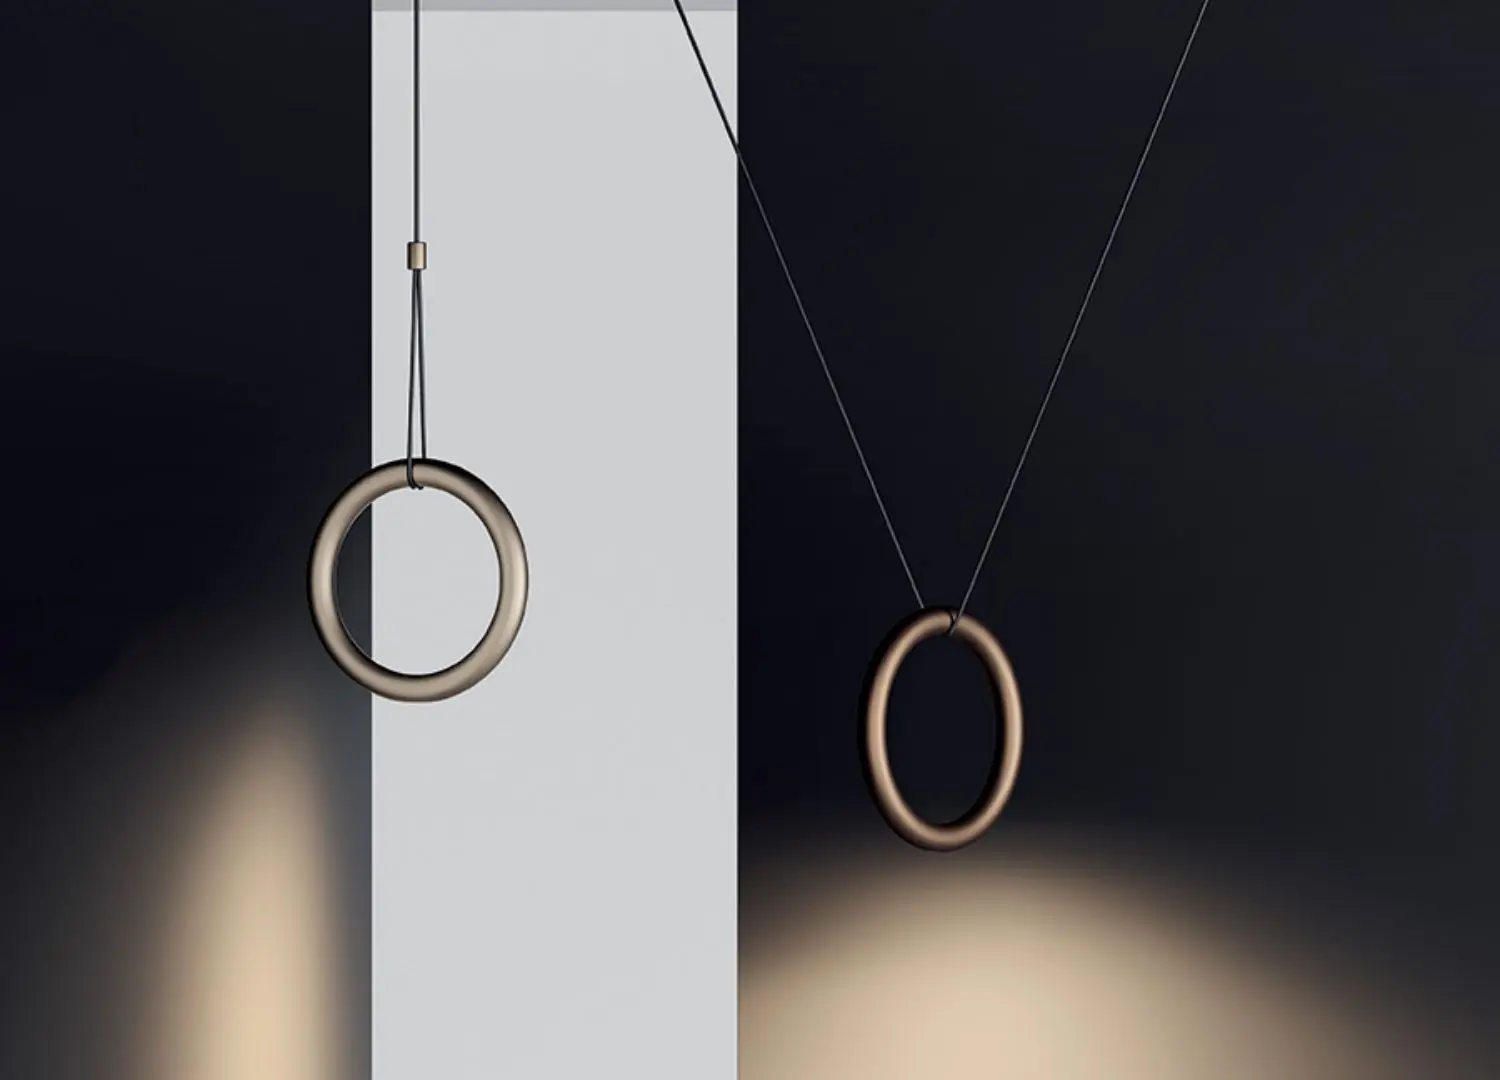 IVY by Lodes, an Architectural Lighting Solution Designed by Vittorio Massimo